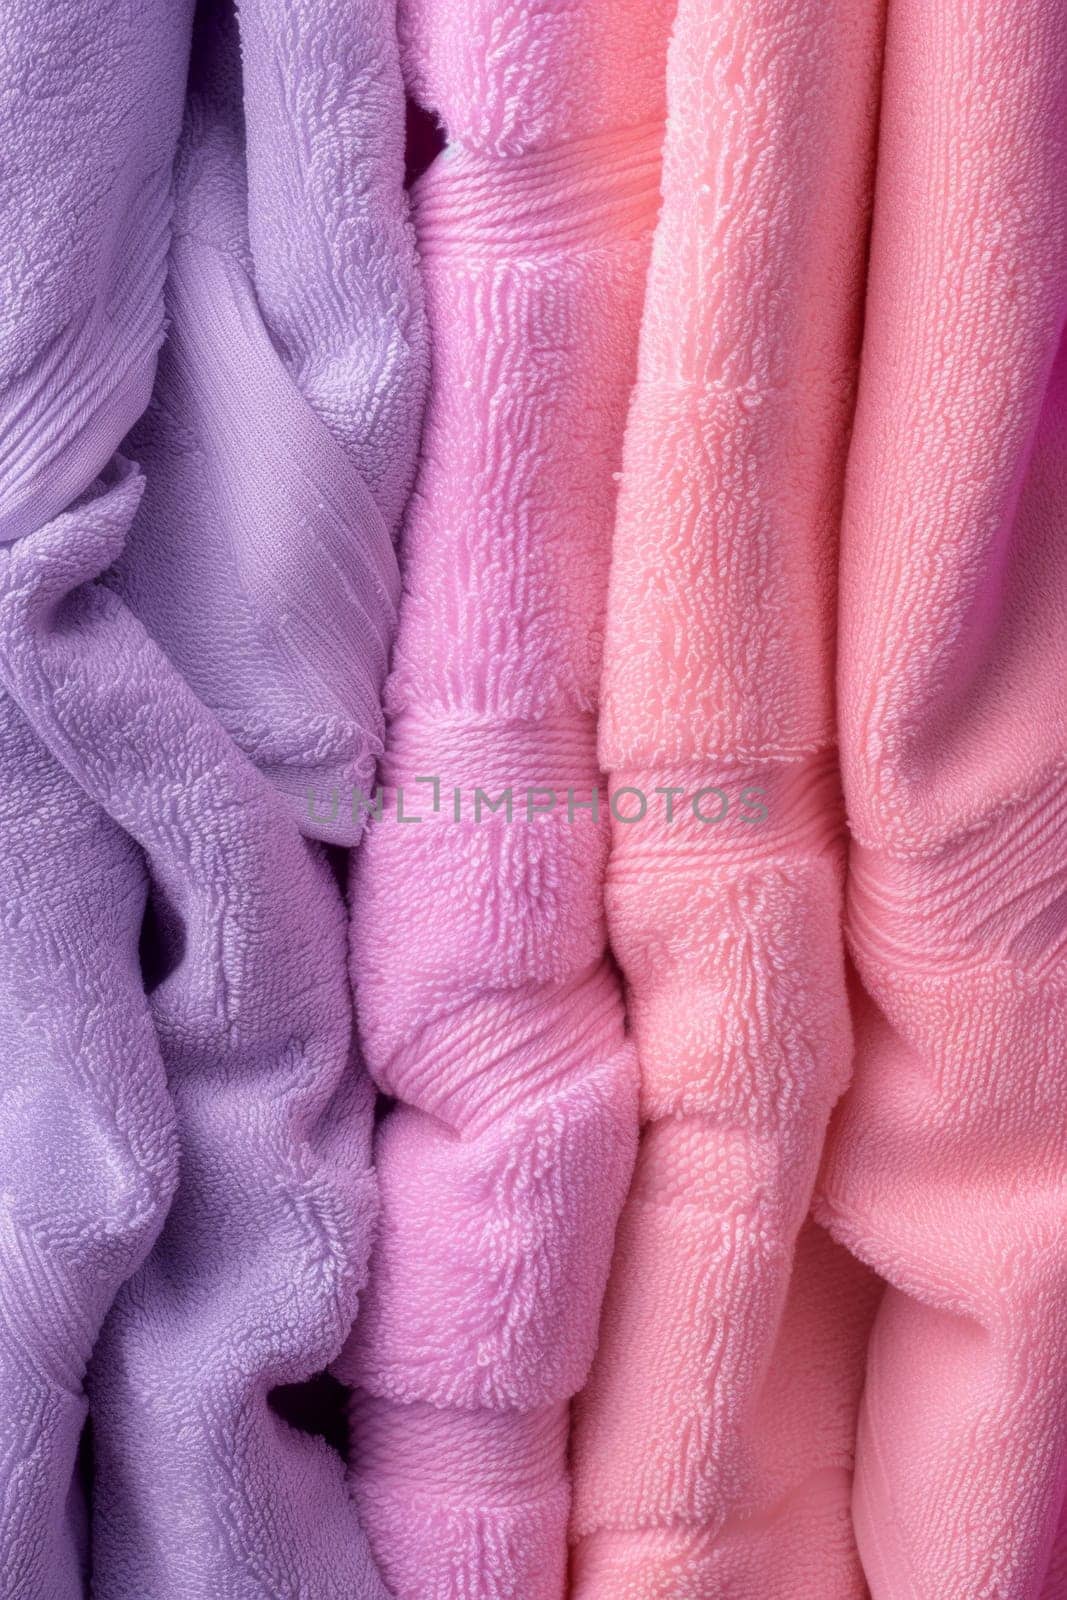 Clean Pink and purple towels by Lobachad